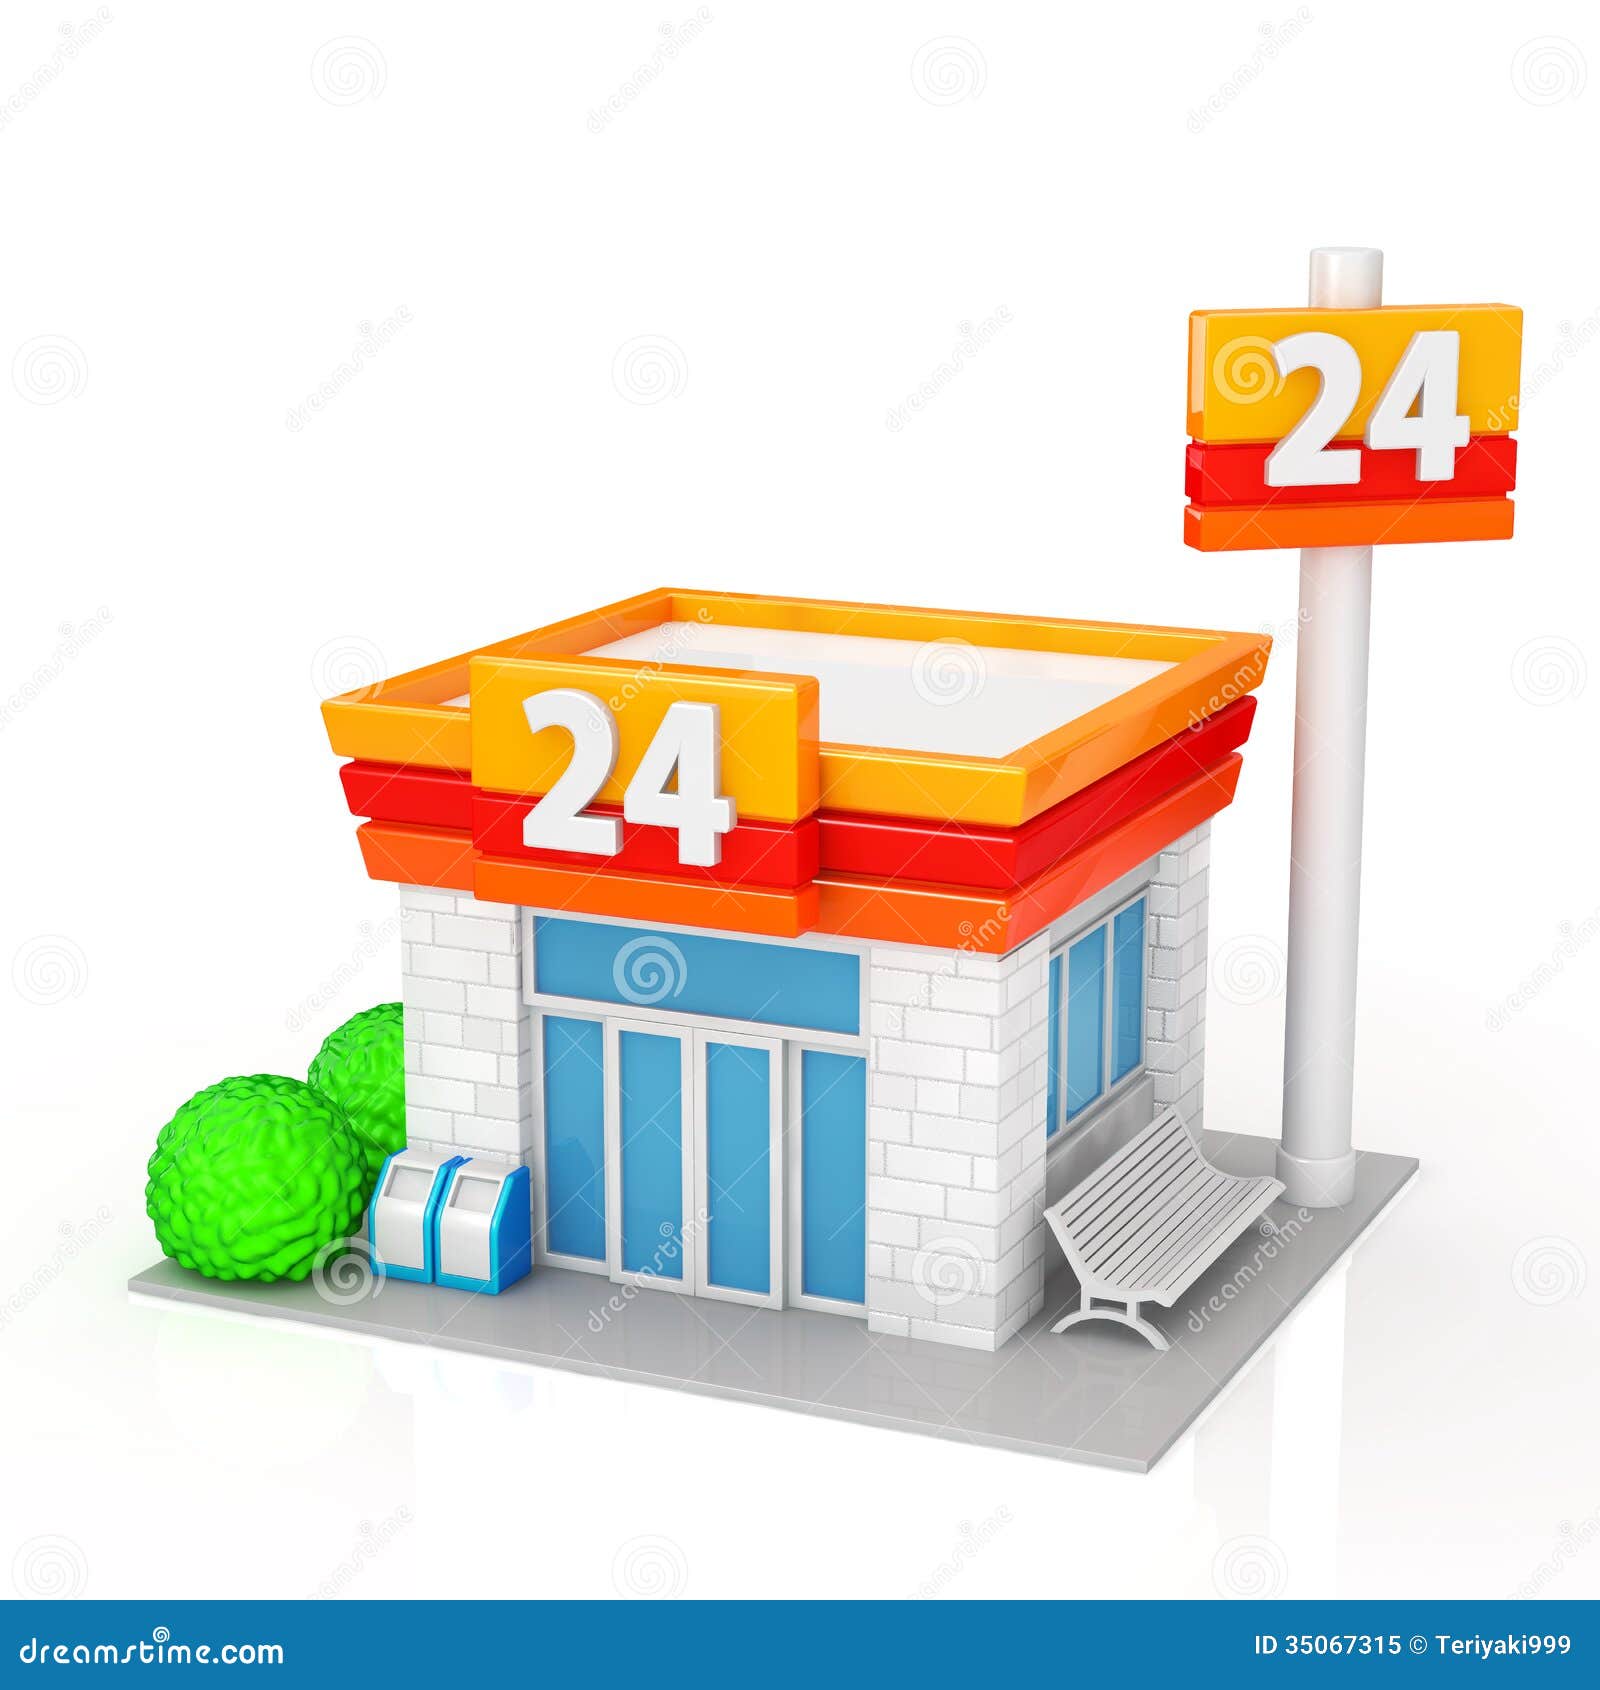 clipart of retail stores - photo #18